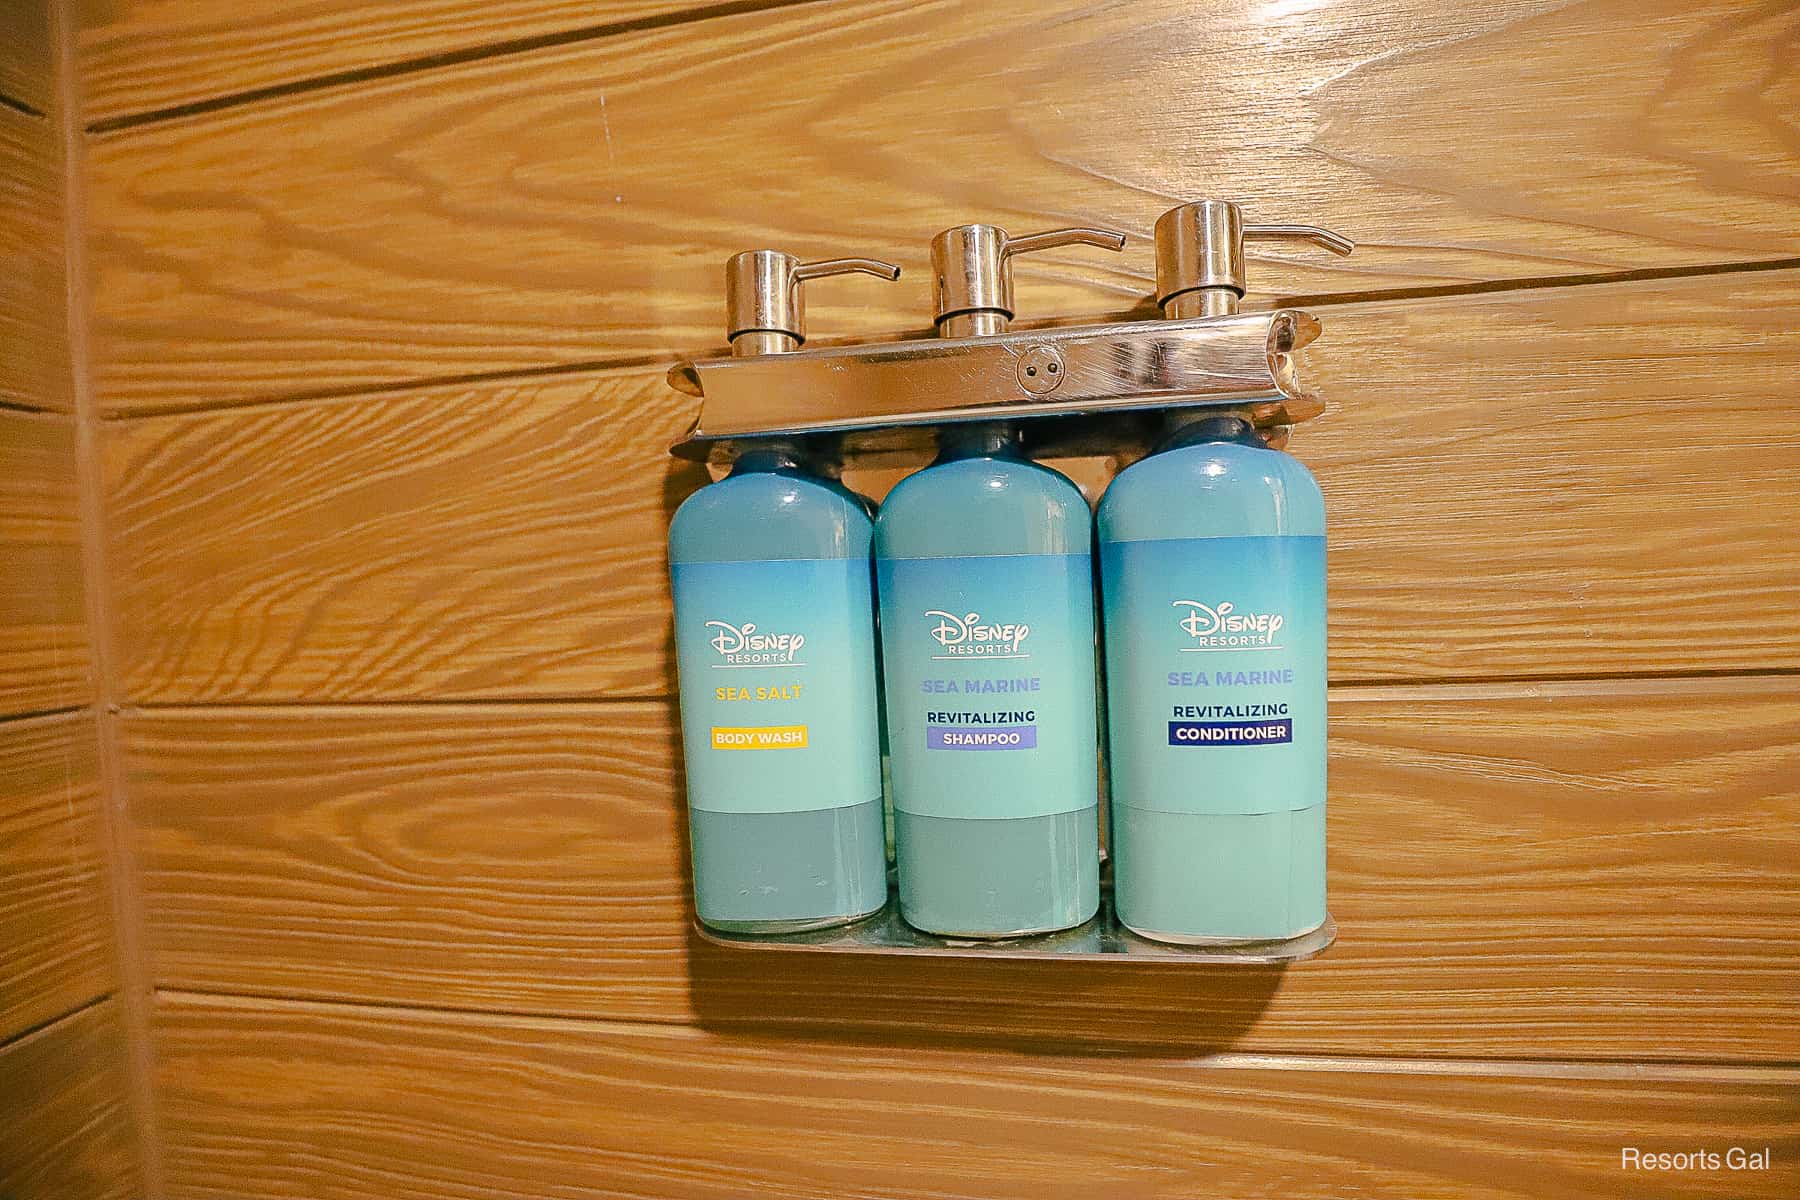 Built-in to the shower: Shampoo, Conditioner, and Body Wash 